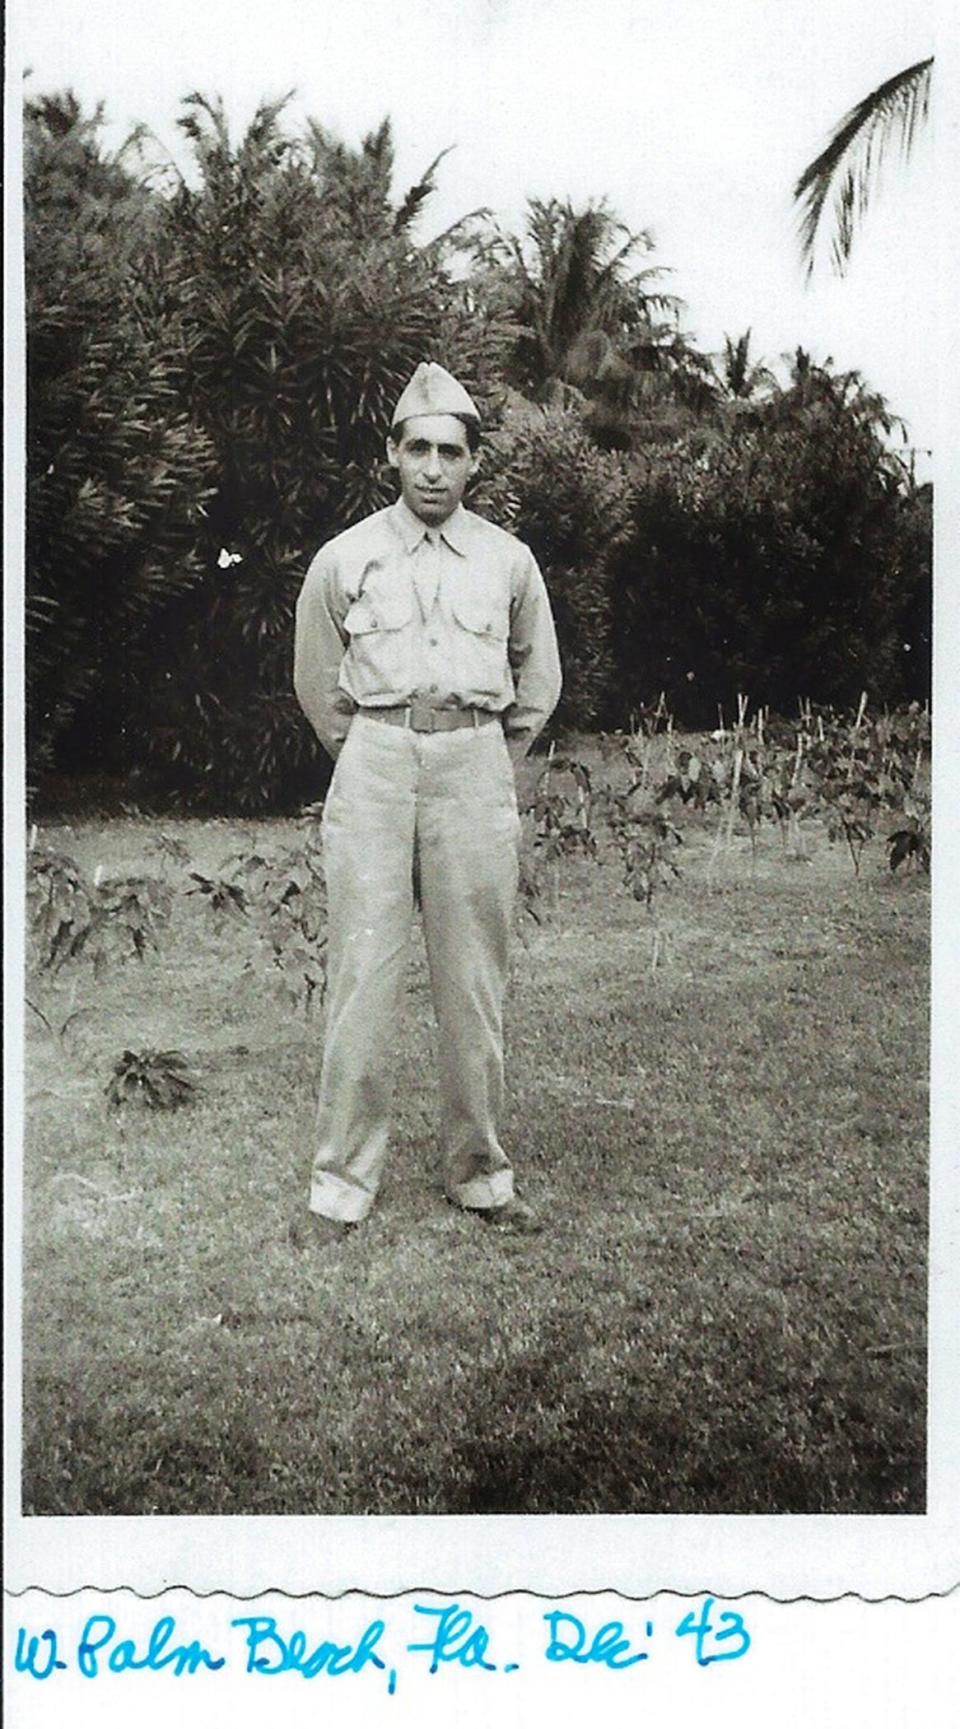 Louis Karp, one of The Fourteen, in West Palm Beach in December 1943, the month he was killed.